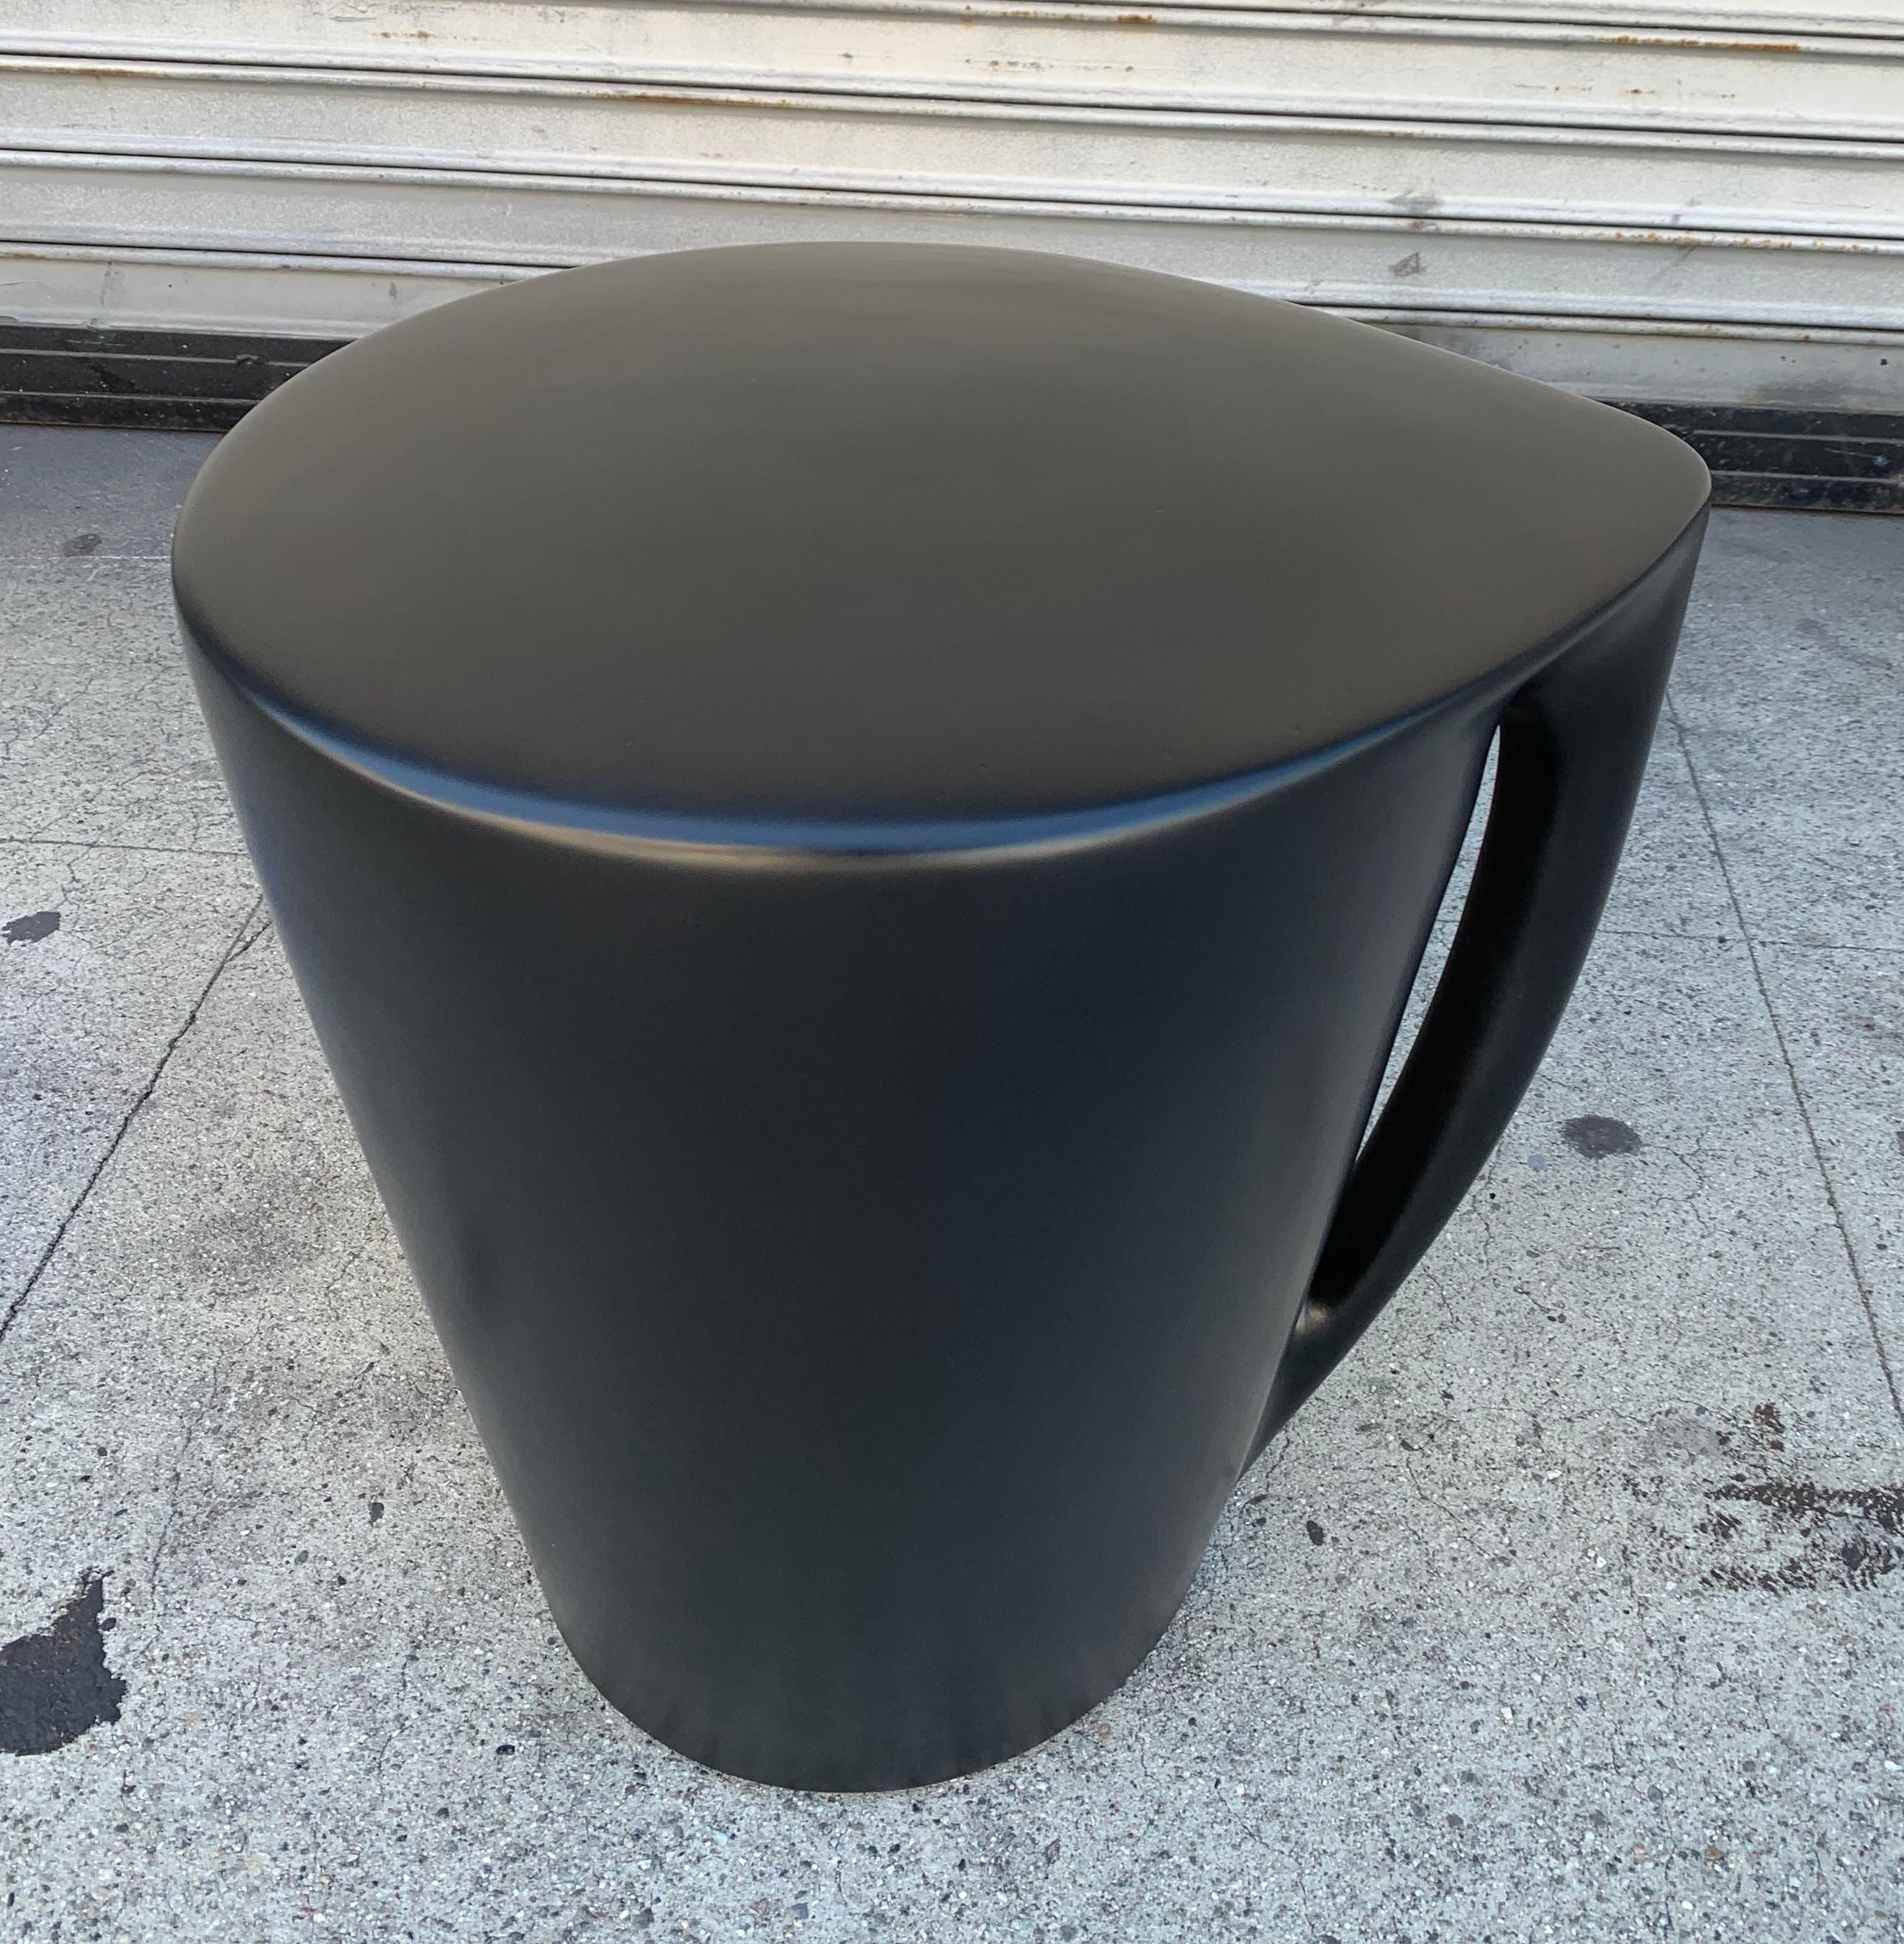 Philippe Starck 2008 Miss T XO icon porcelain seat or object d’art, made in France and also available in silver and black, we have a total of 1 in gold, 2 in black and 2 in silver.
Measures: 17” high x 15” wide x 17” deep.